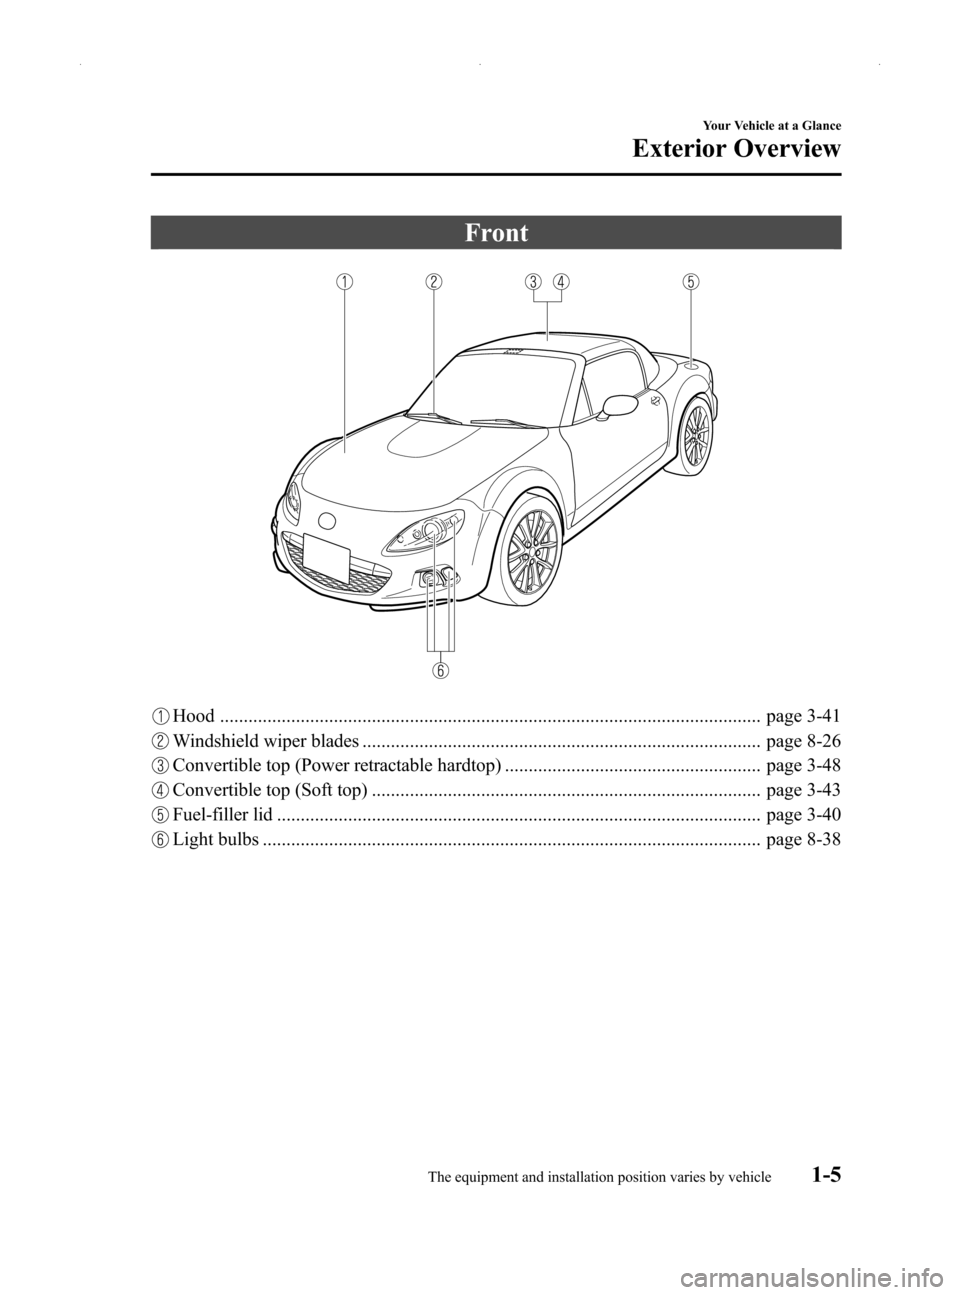 MAZDA MODEL MX-5 2014  Owners Manual (in English) Black plate (11,1)
Front
Hood .................................................................................................................. page 3-41
Windshield wiper blades .....................